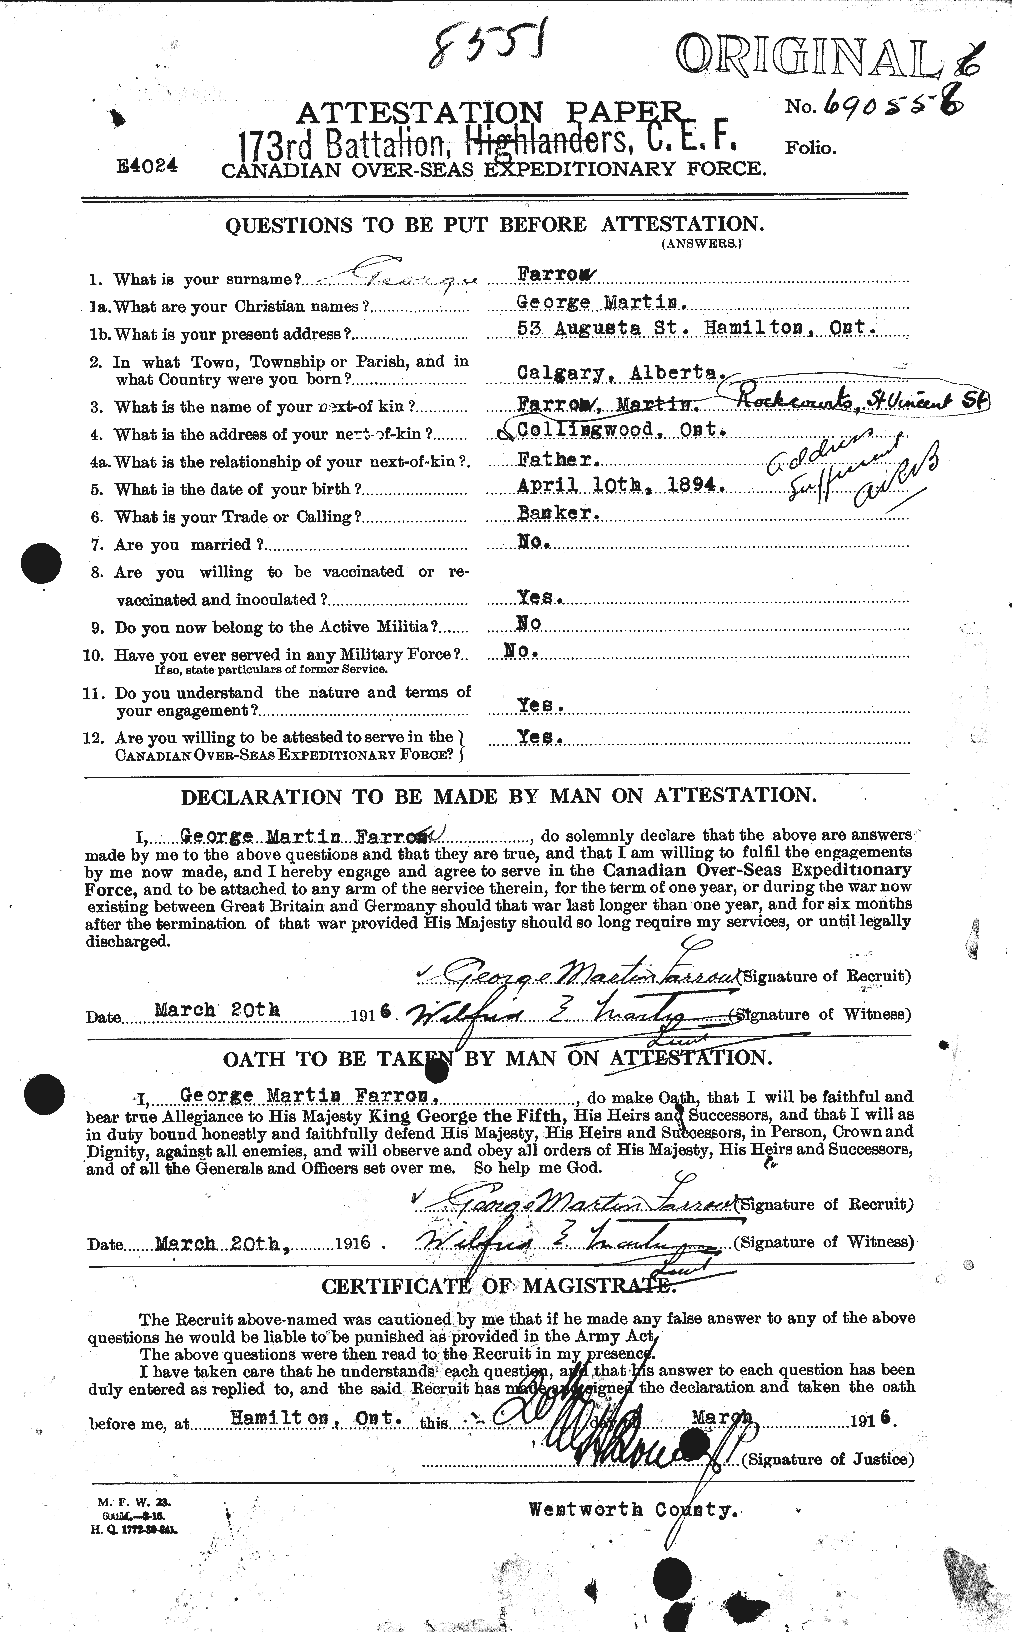 Personnel Records of the First World War - CEF 319161a